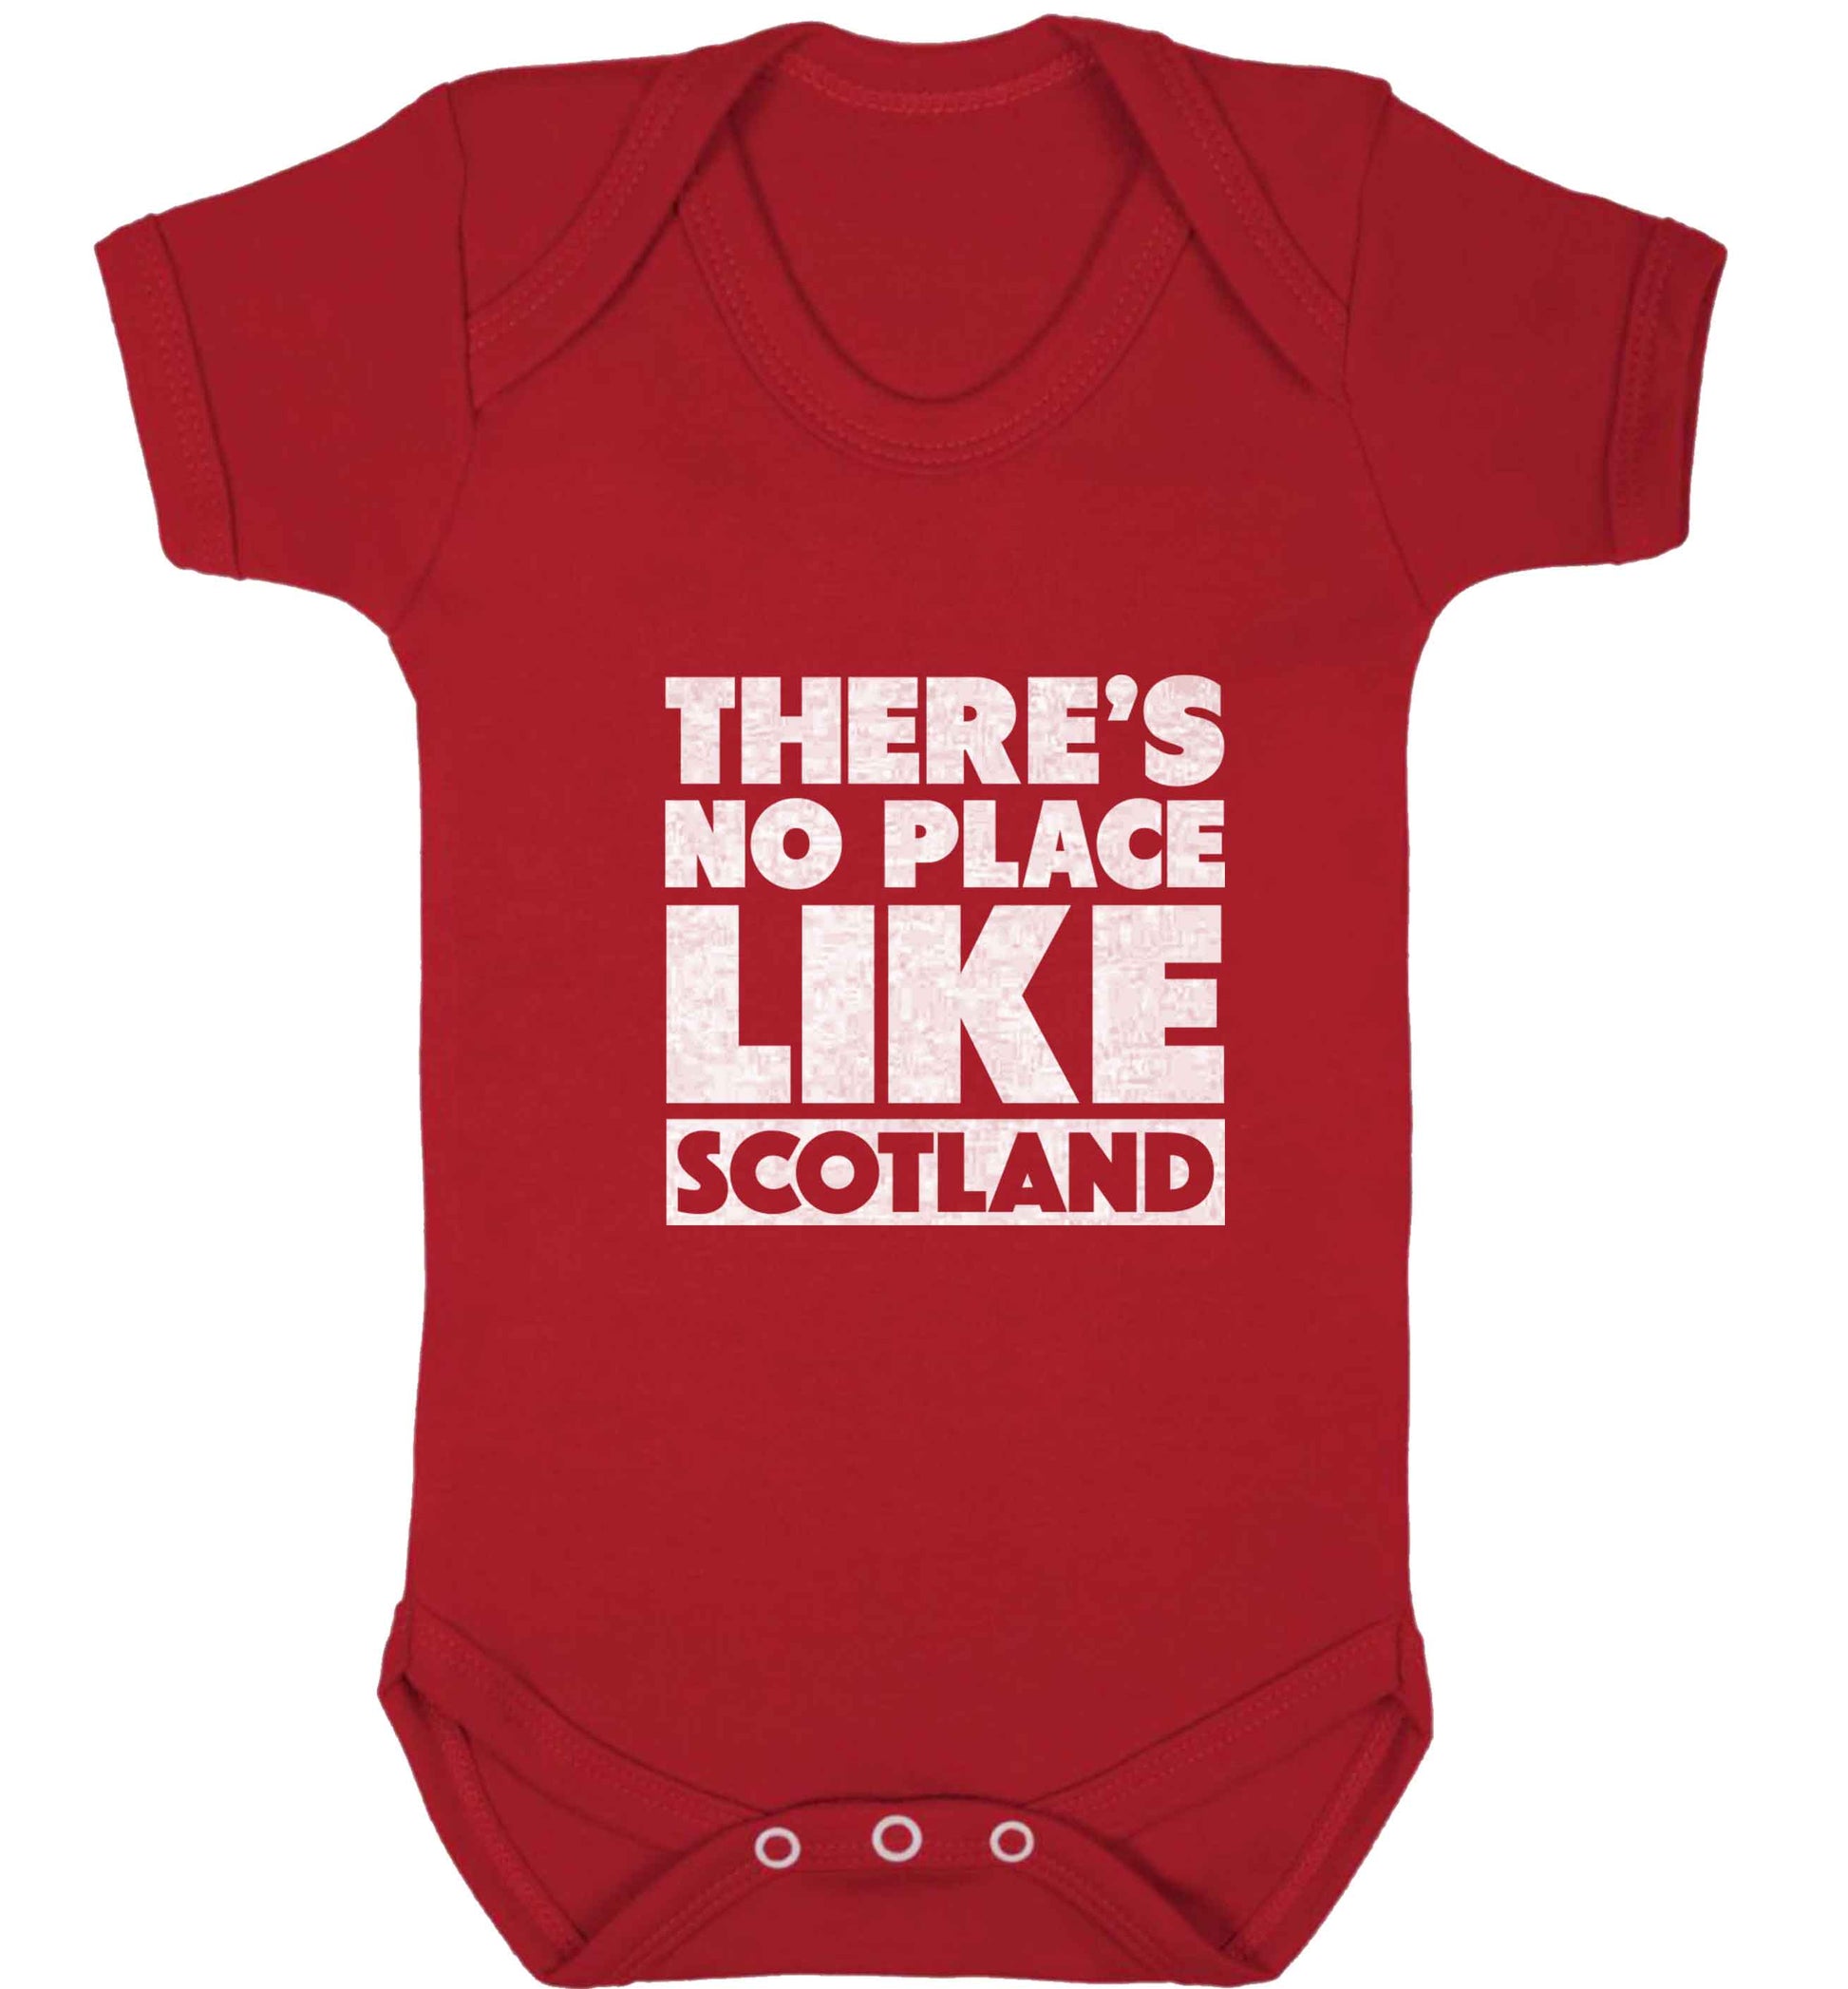 There's no place like Scotland baby vest red 18-24 months